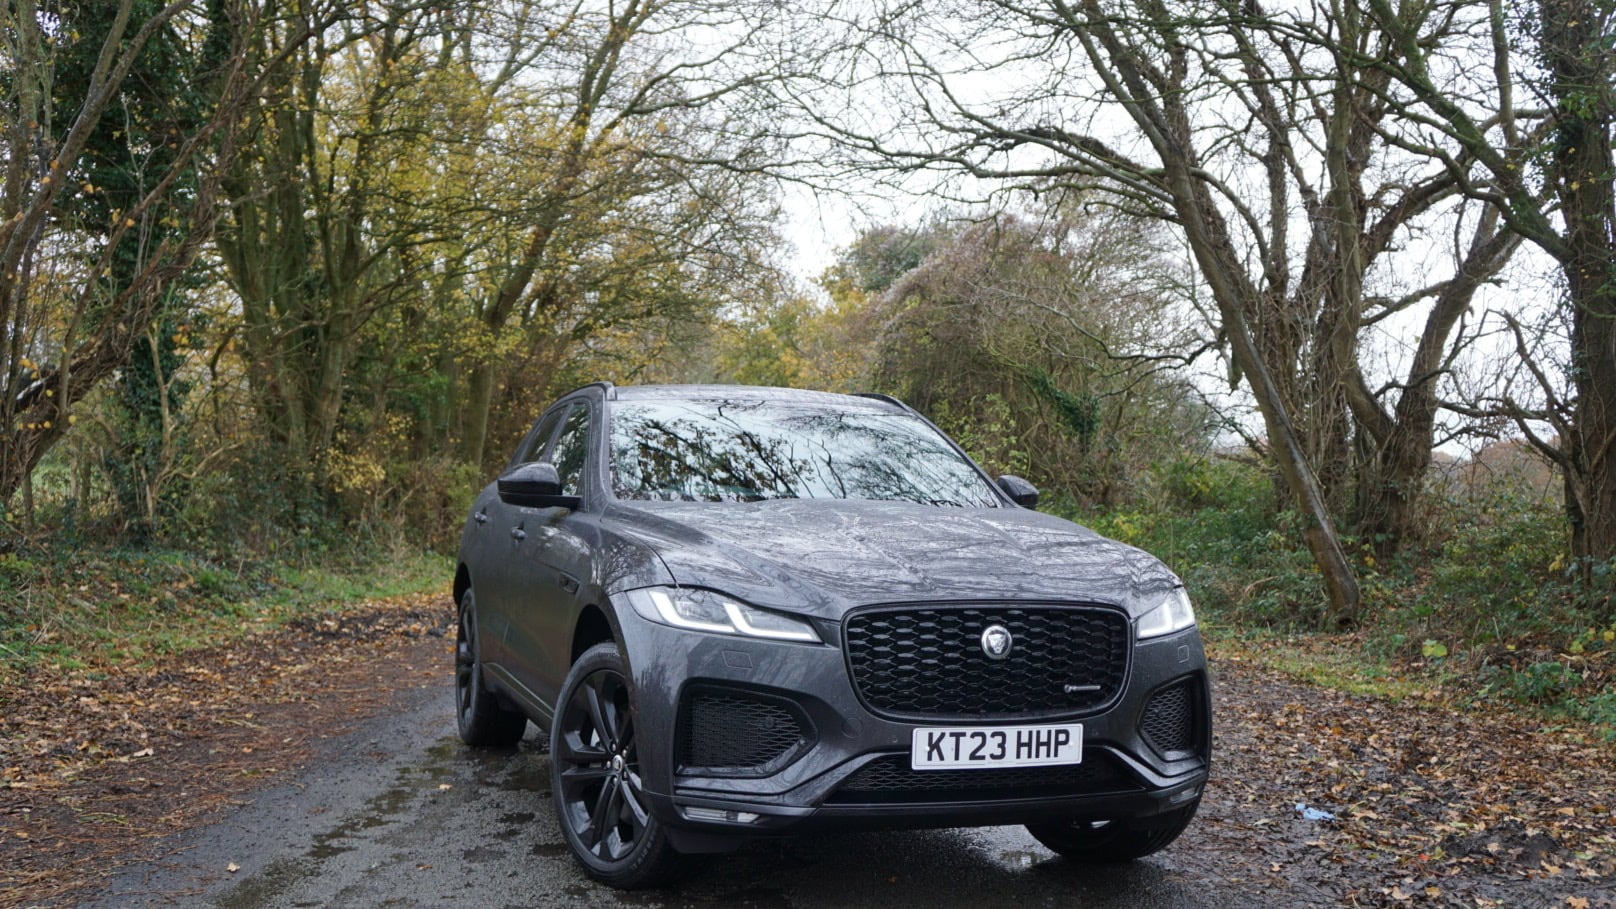 The F-Pace has been a popular SUV for a number of years